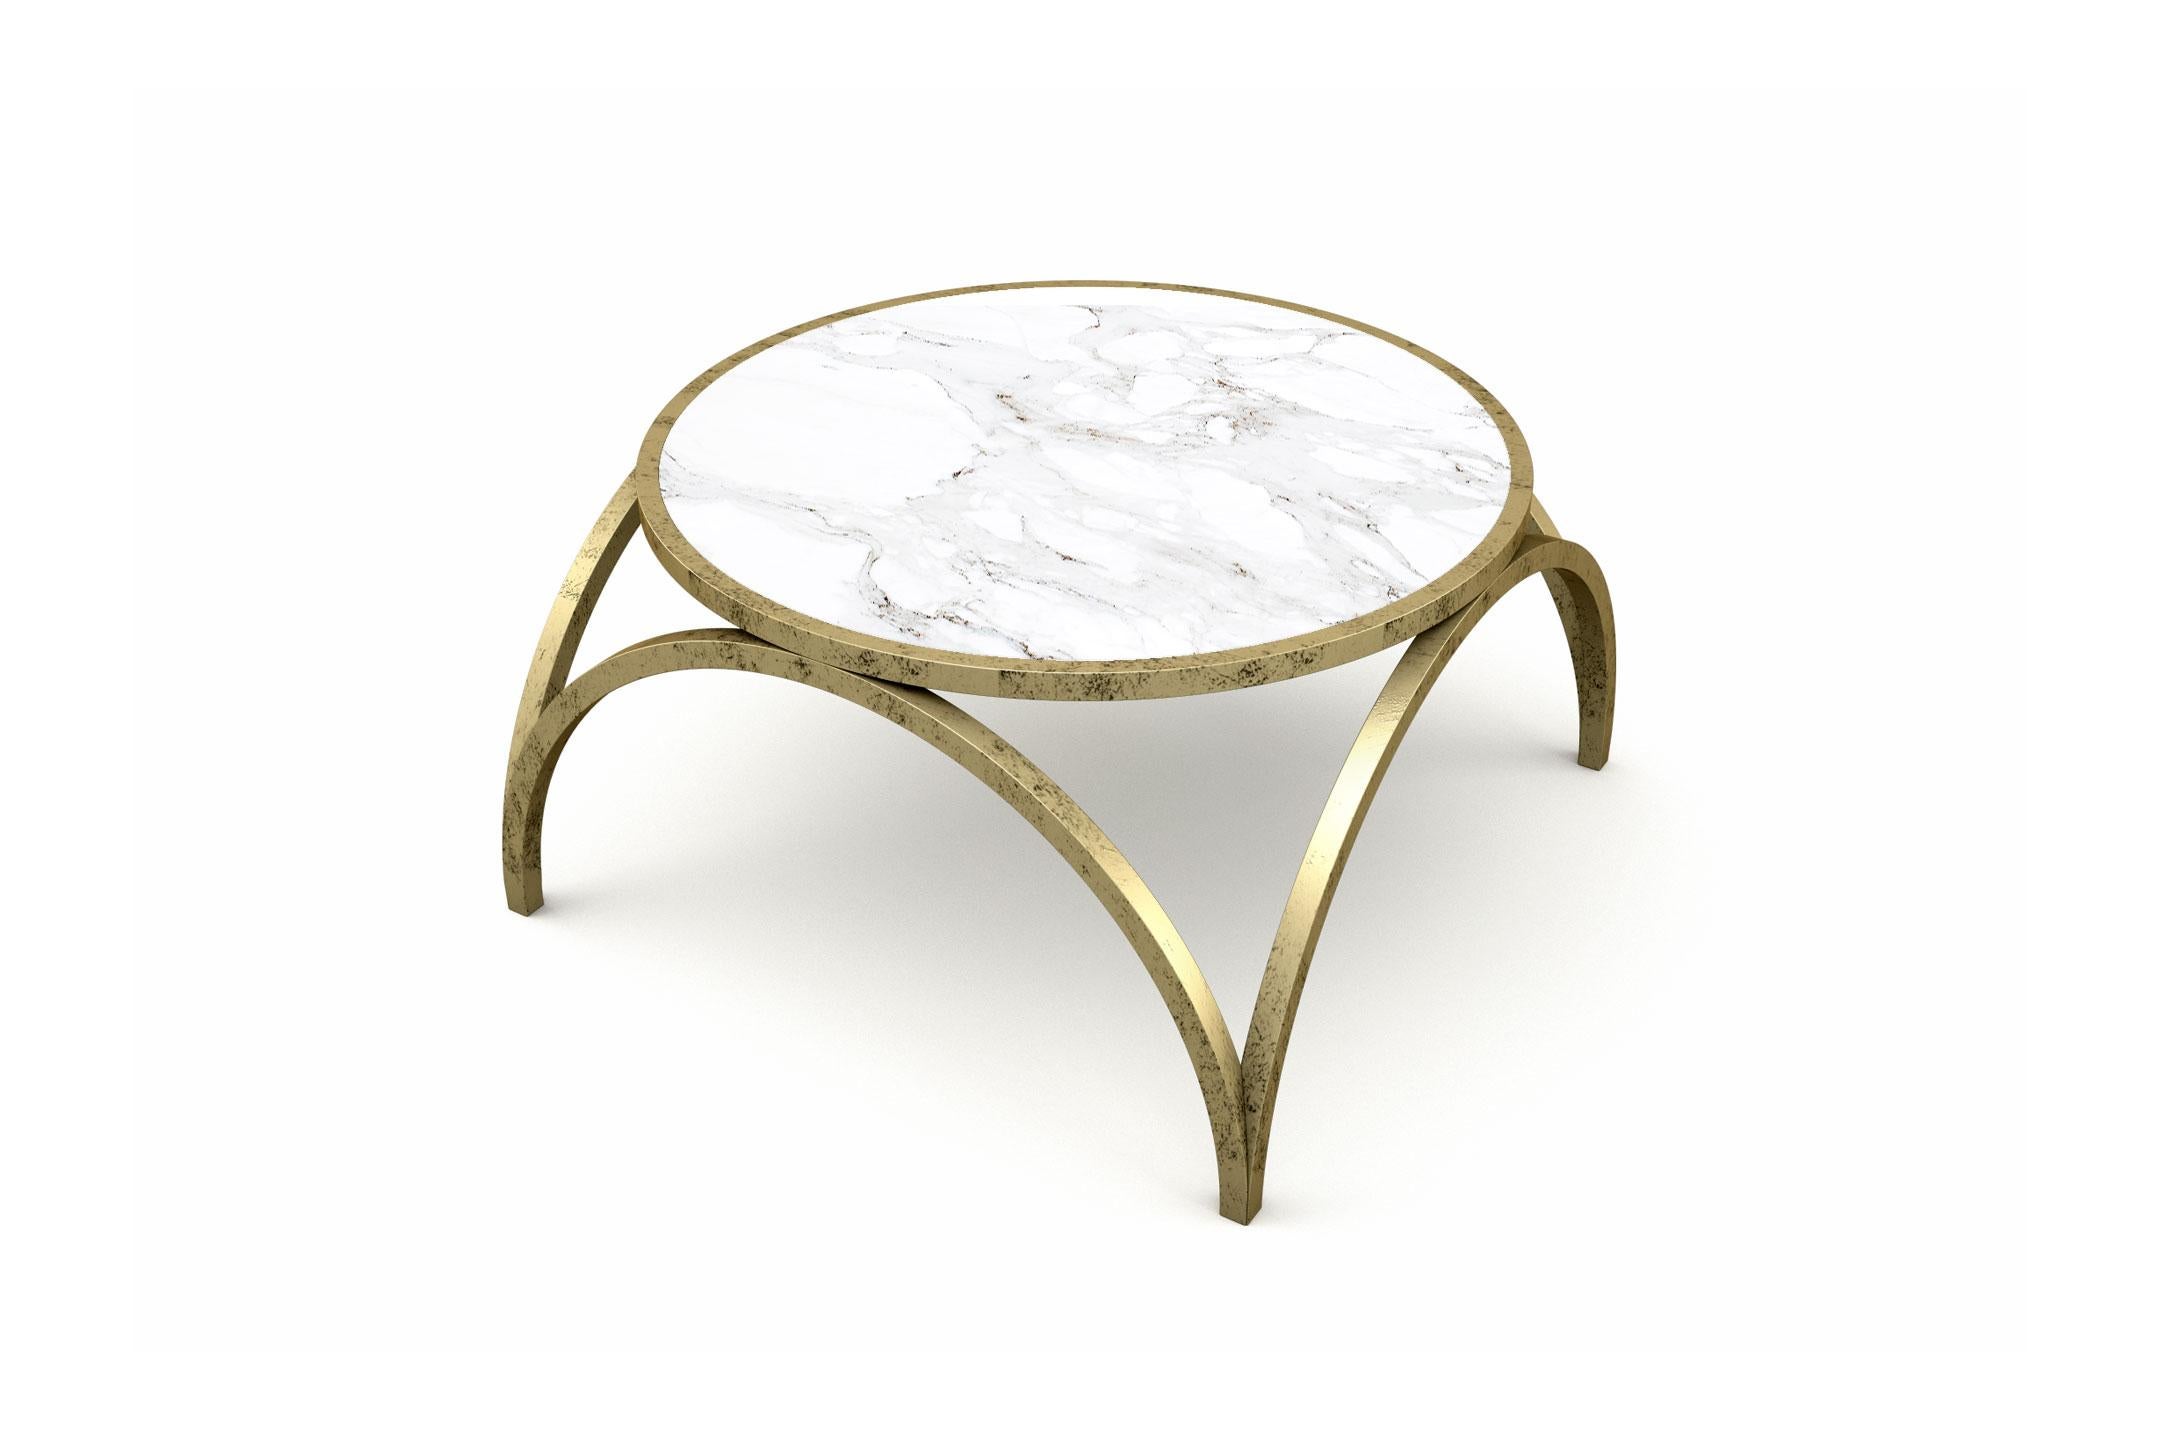 Crescent Medium Coffe Table - Modern Brass Coffee Table In New Condition For Sale In London, GB